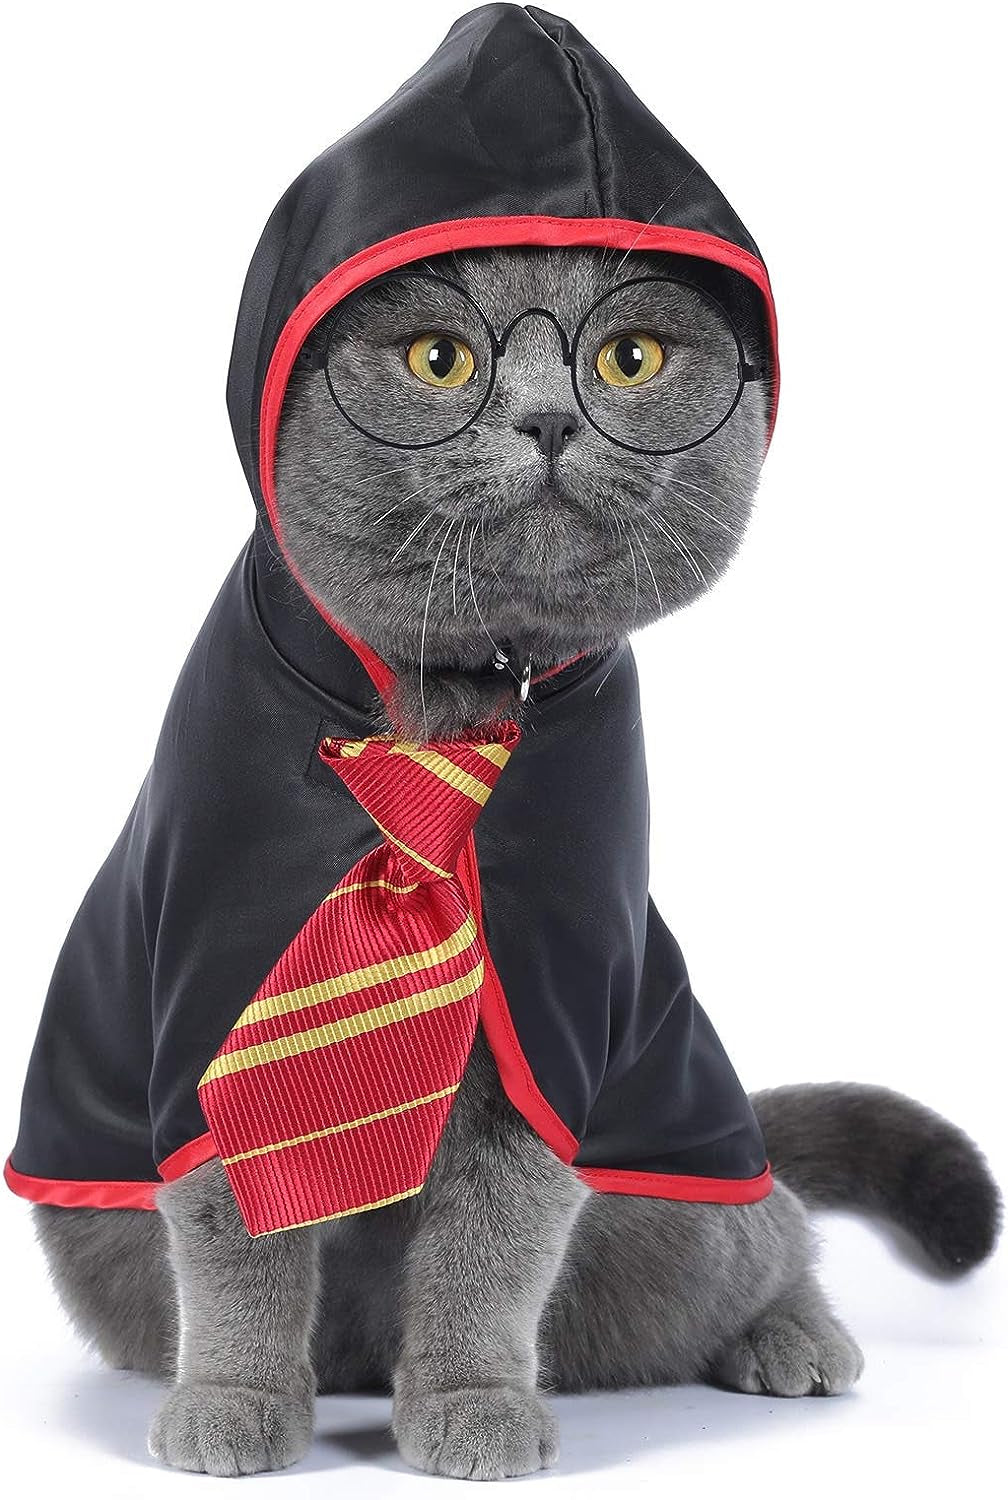 Cat Halloween Costume Funny Pet Clothes Kitten Costumes Small Dog Accessories Outfits